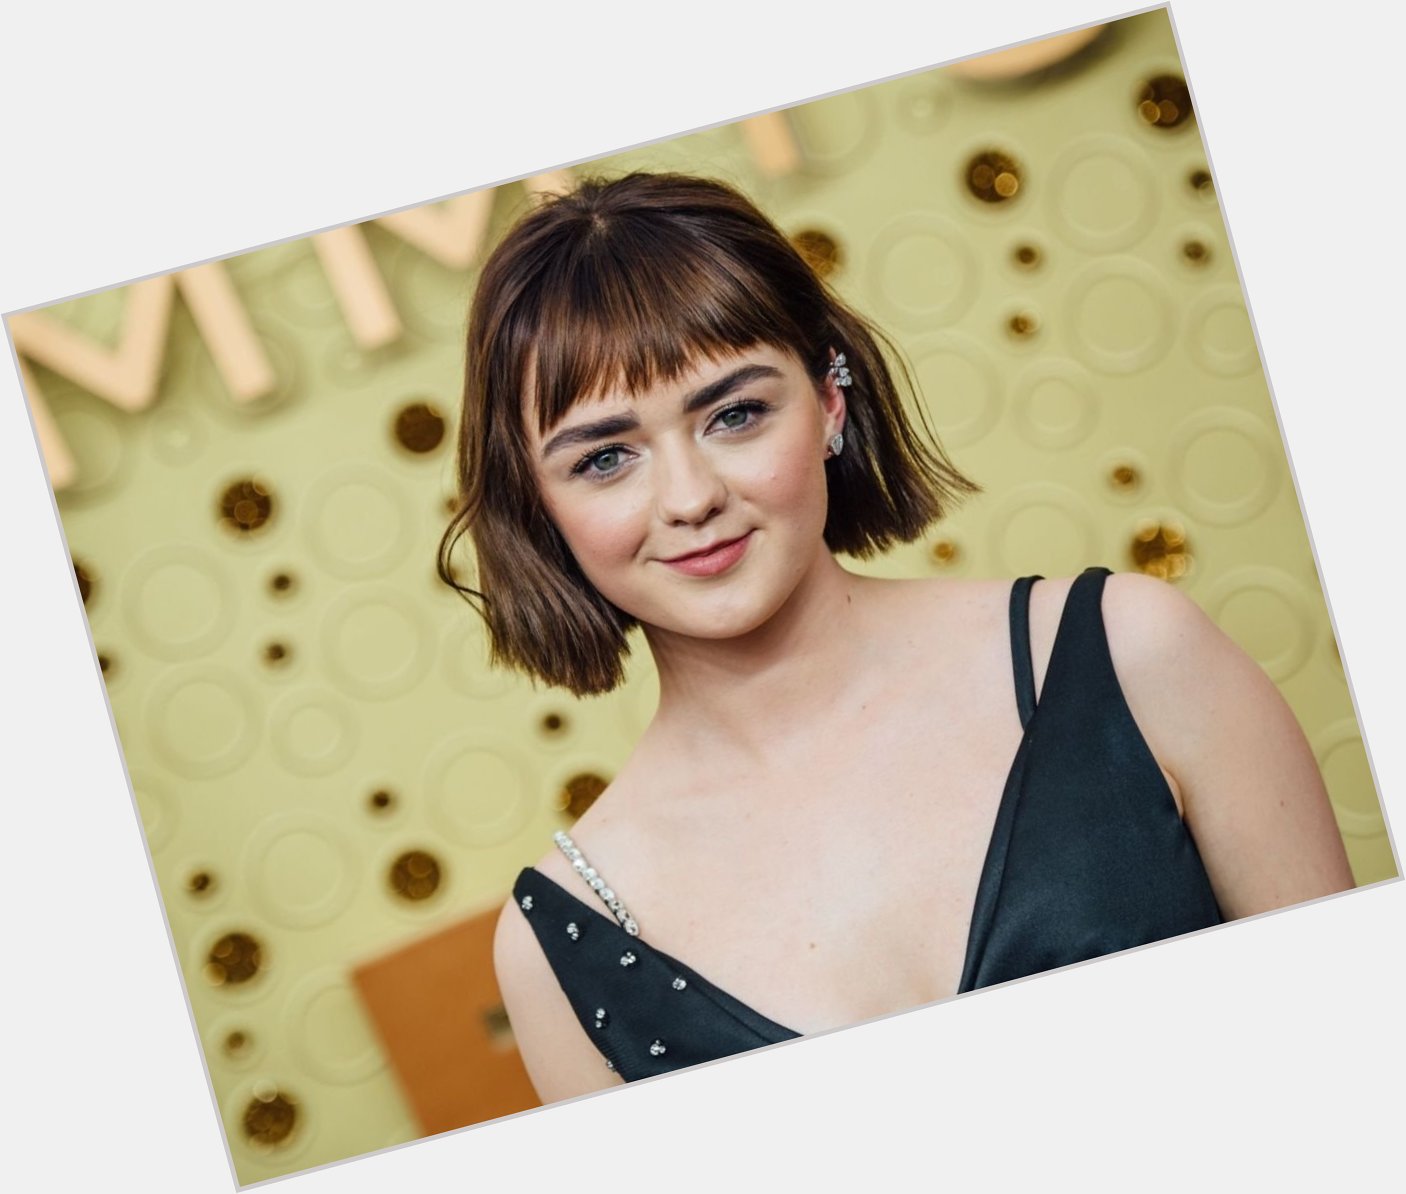 And Happy Birthday to Maisie Williams too  